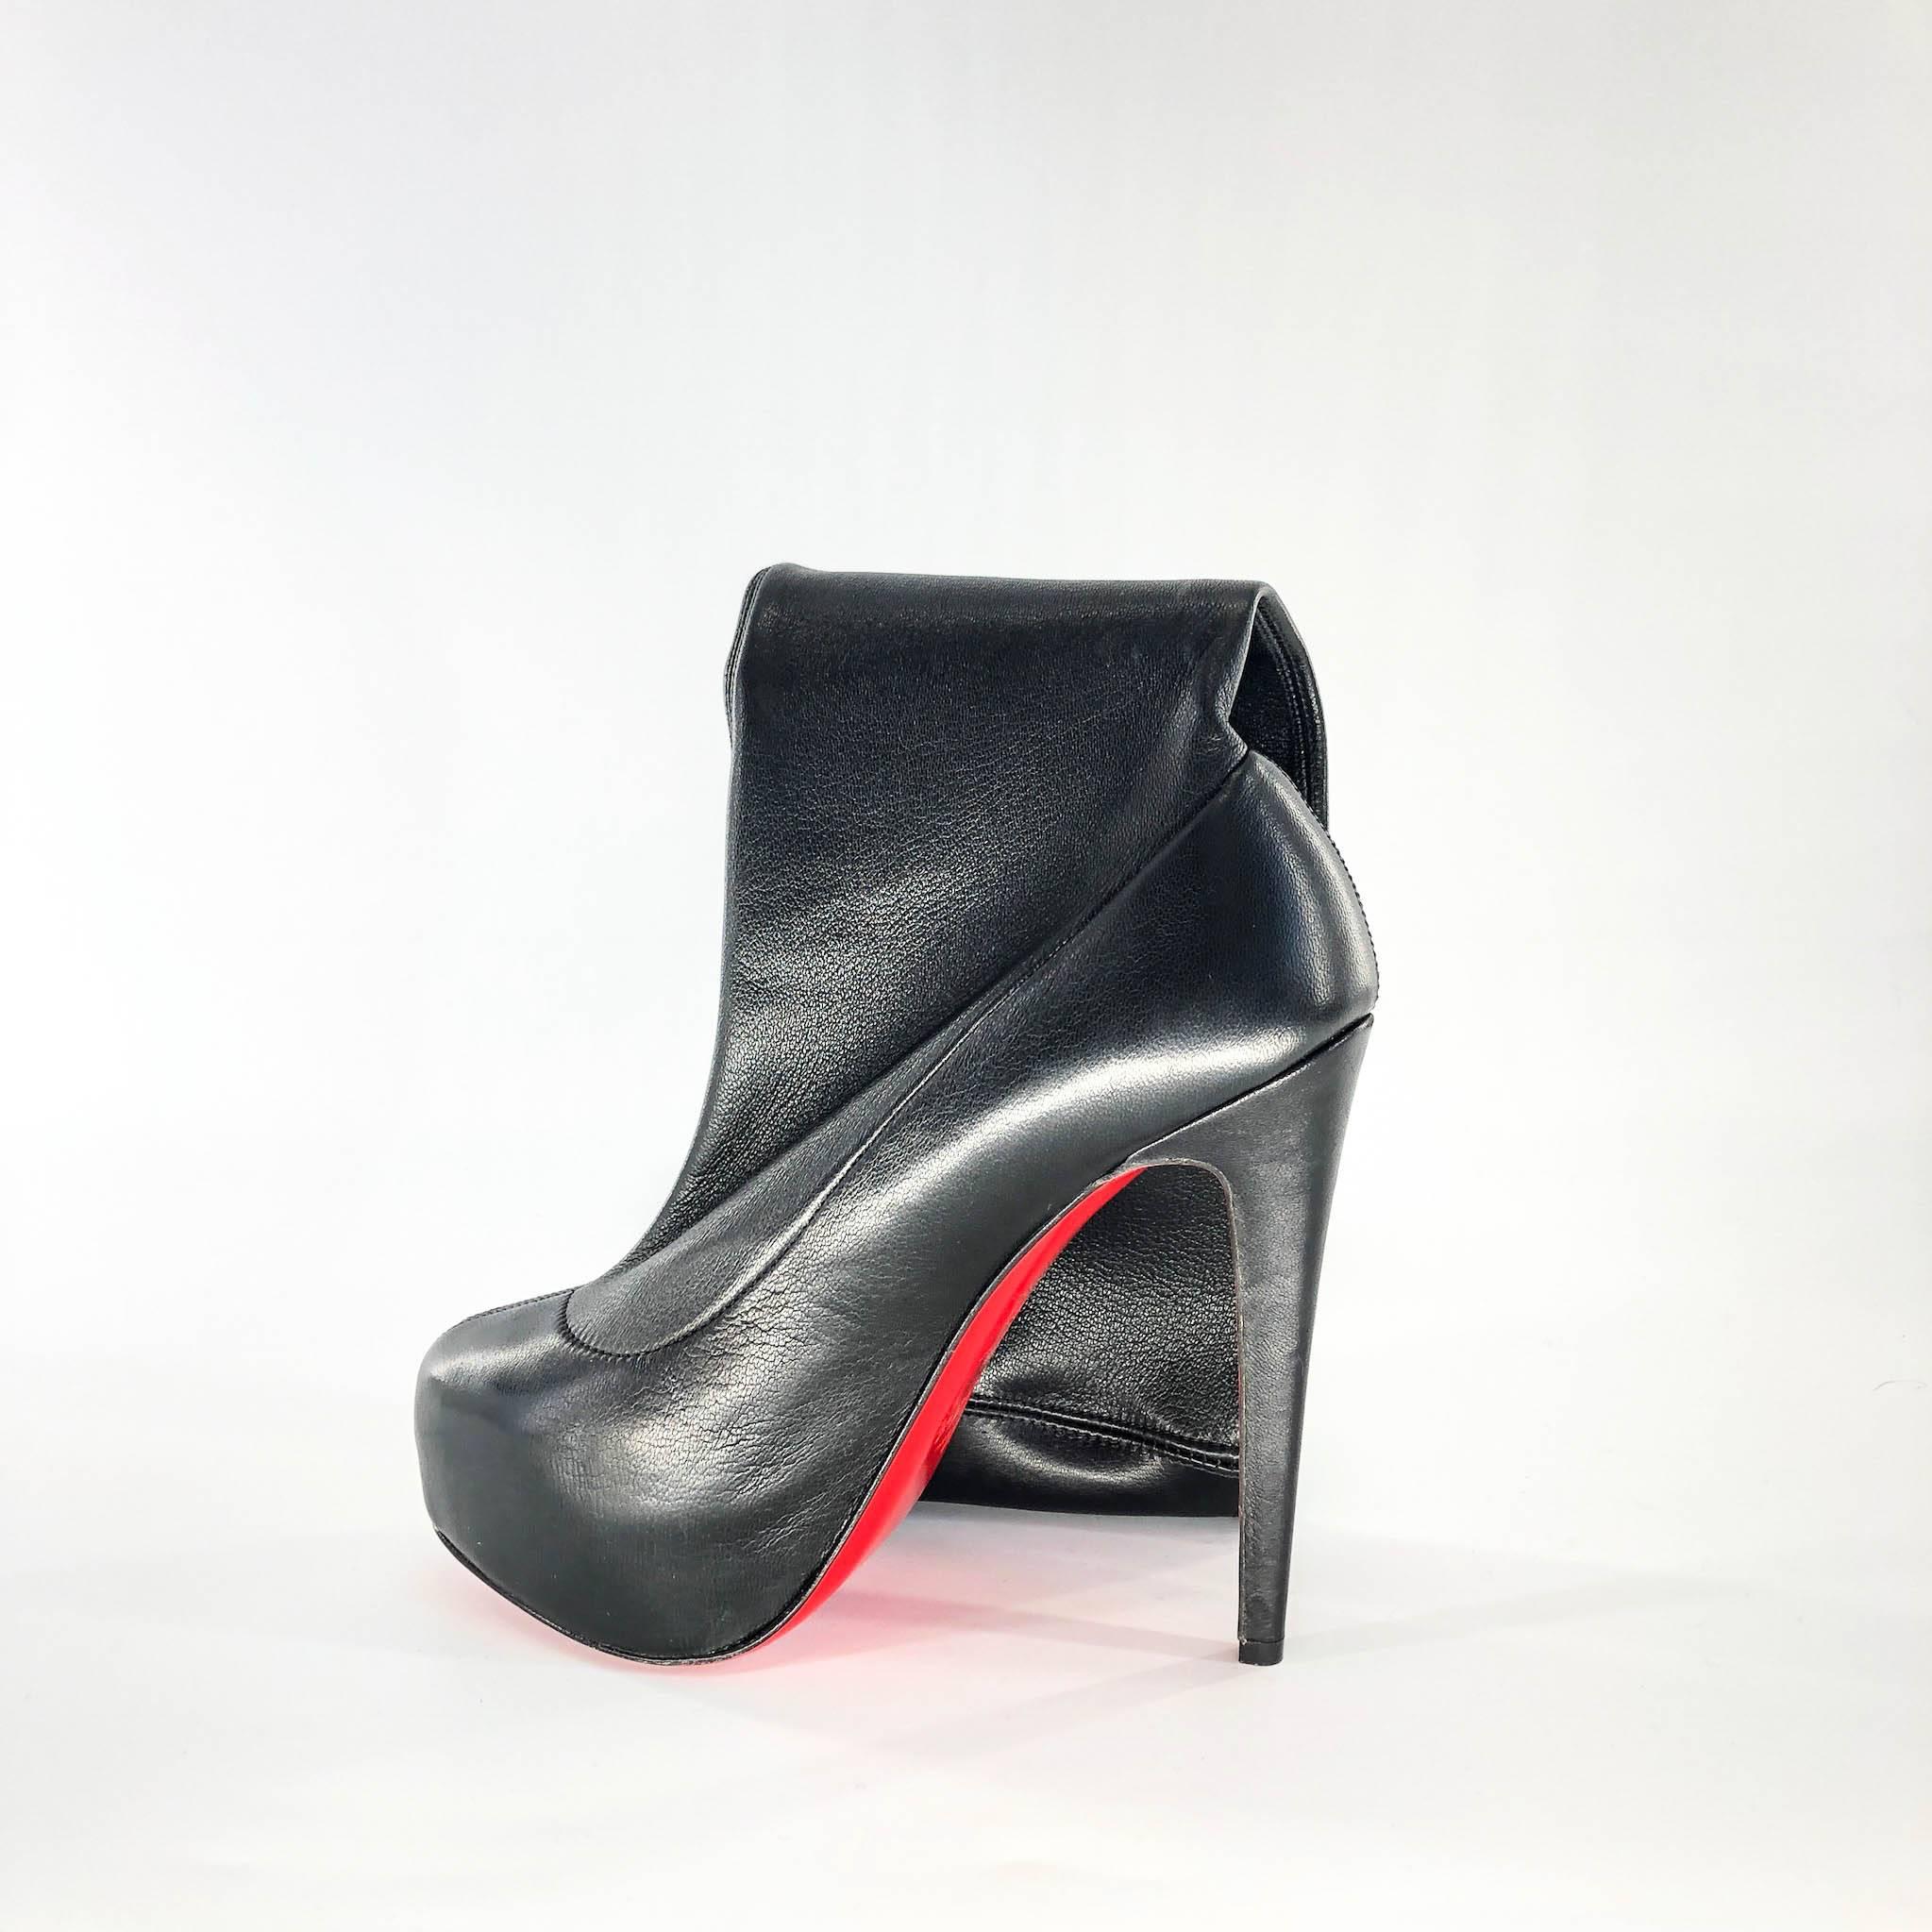 This pair of Christian Louboutin Thigh High boots add a little drama to any ensemble. In basic black, they’ll go with everything from your favourite pair of jeans to a cute skirt.

These have been worn once for a photo shoot and have a few light